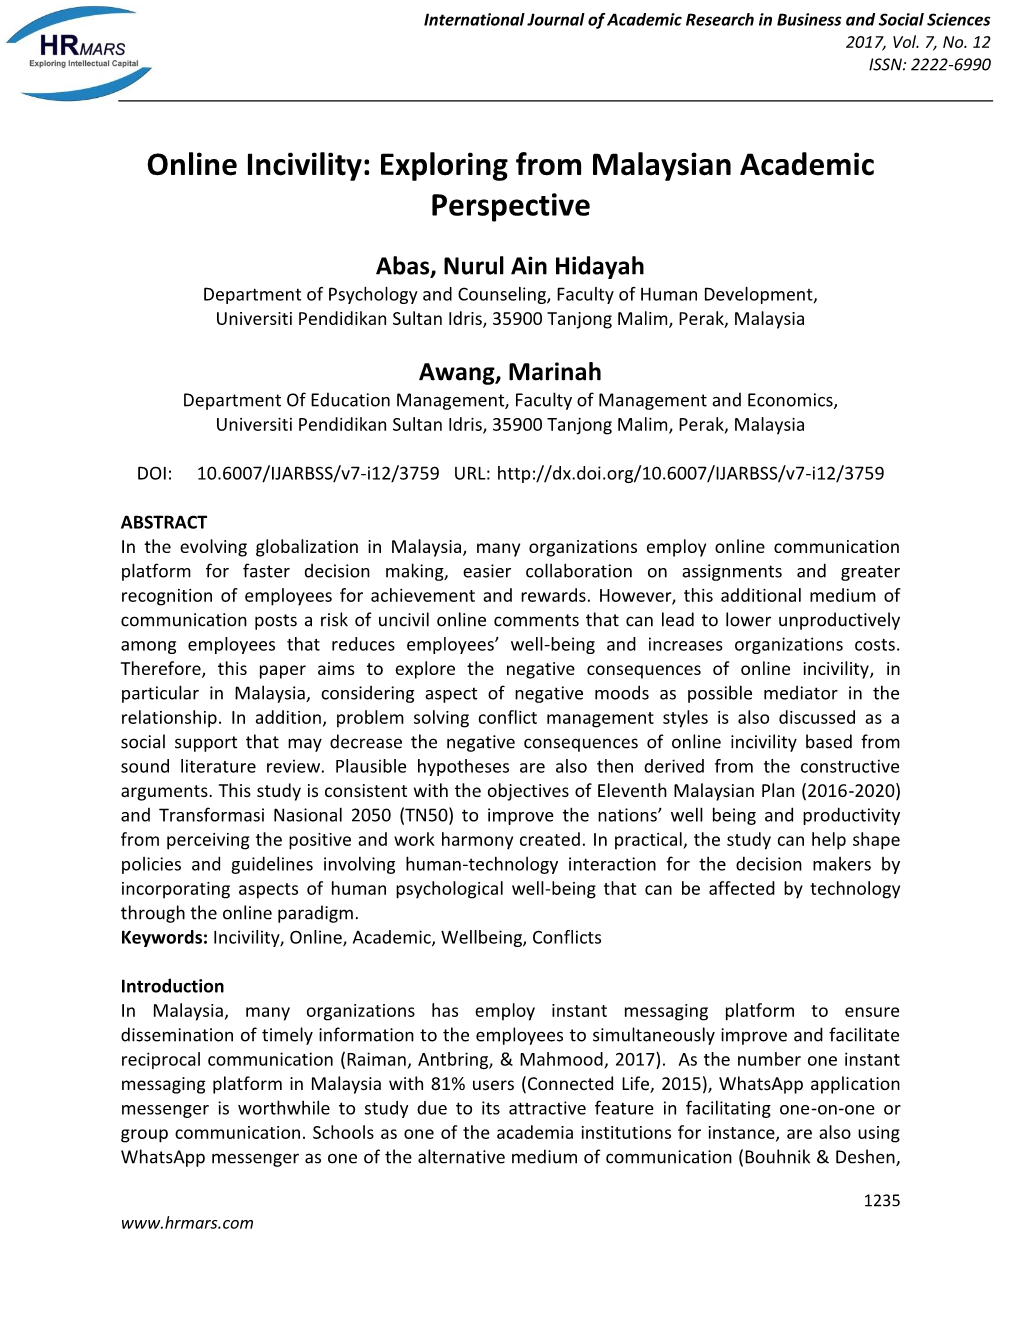 Online Incivility: Exploring from Malaysian Academic Perspective